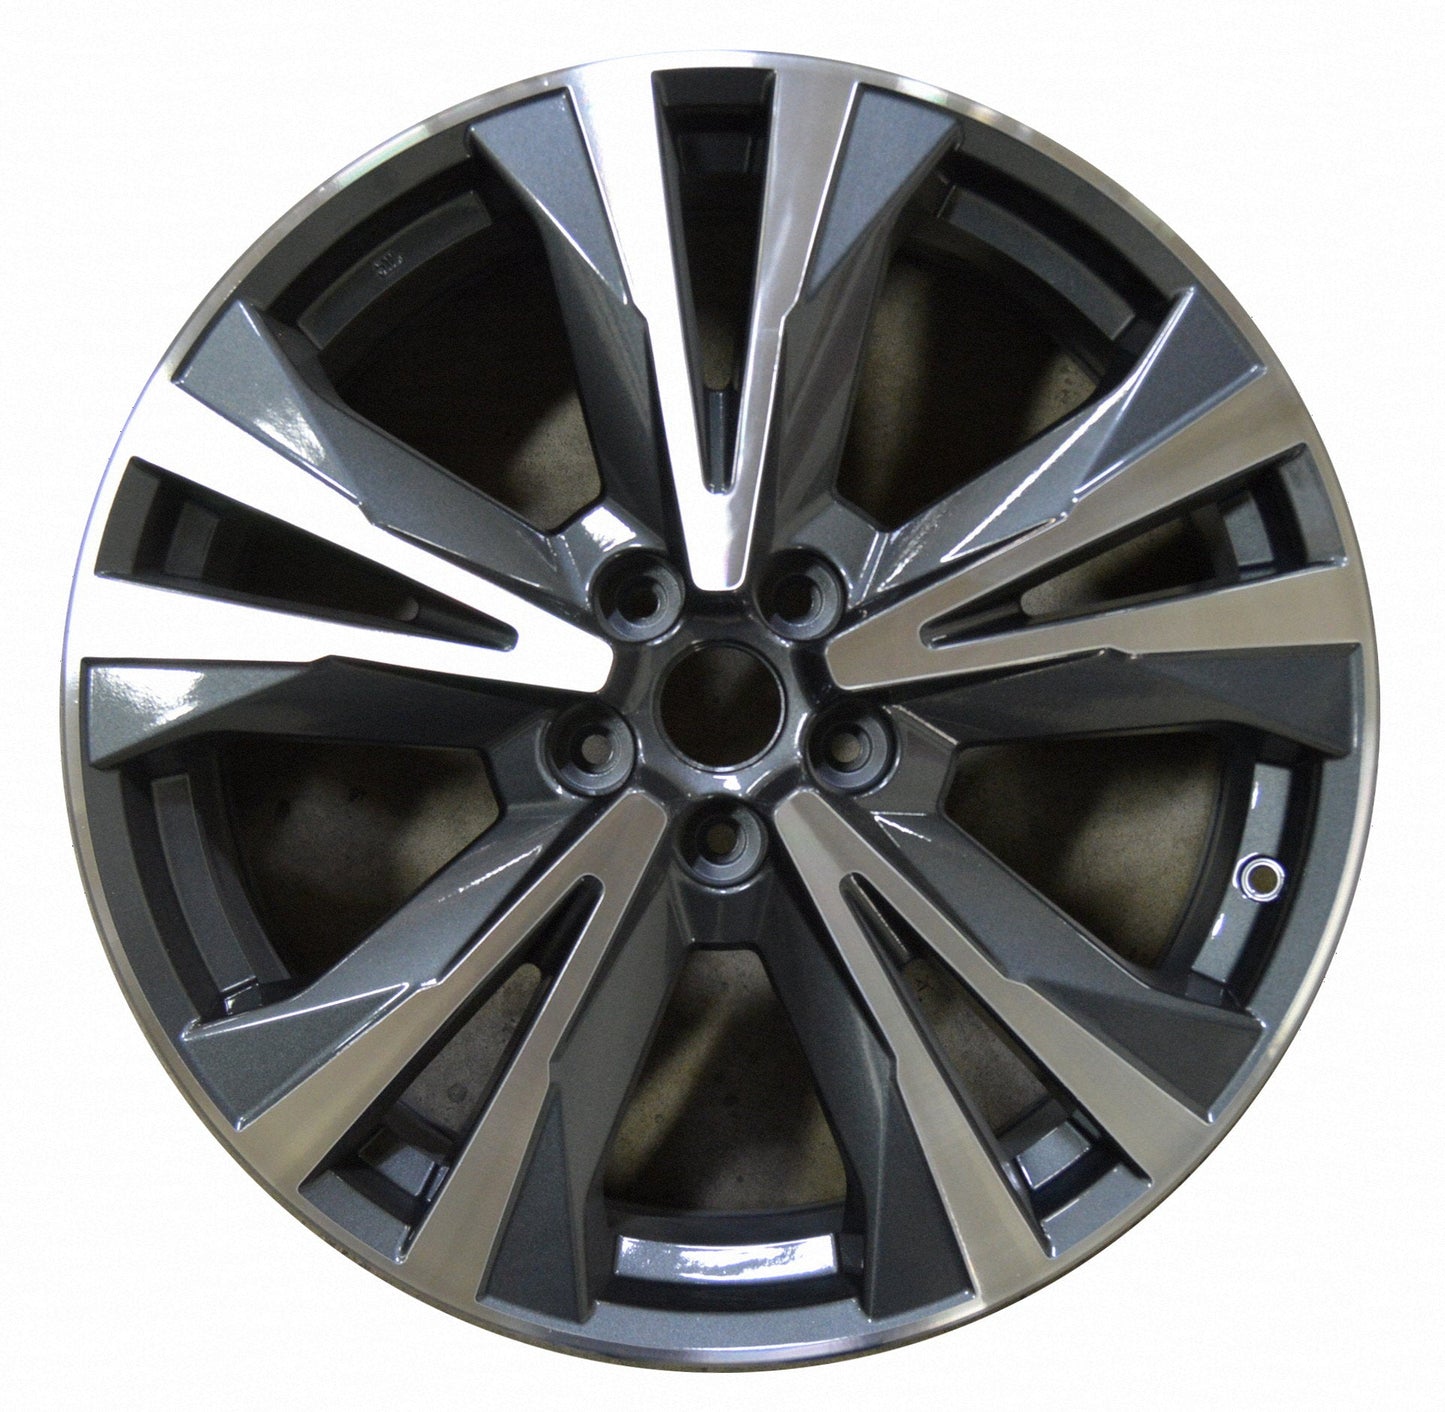 Nissan Pathfinder  2017, 2018, 2019 Factory OEM Car Wheel Size 20x7.5 Alloy WAO.62743.LC127.MABRT